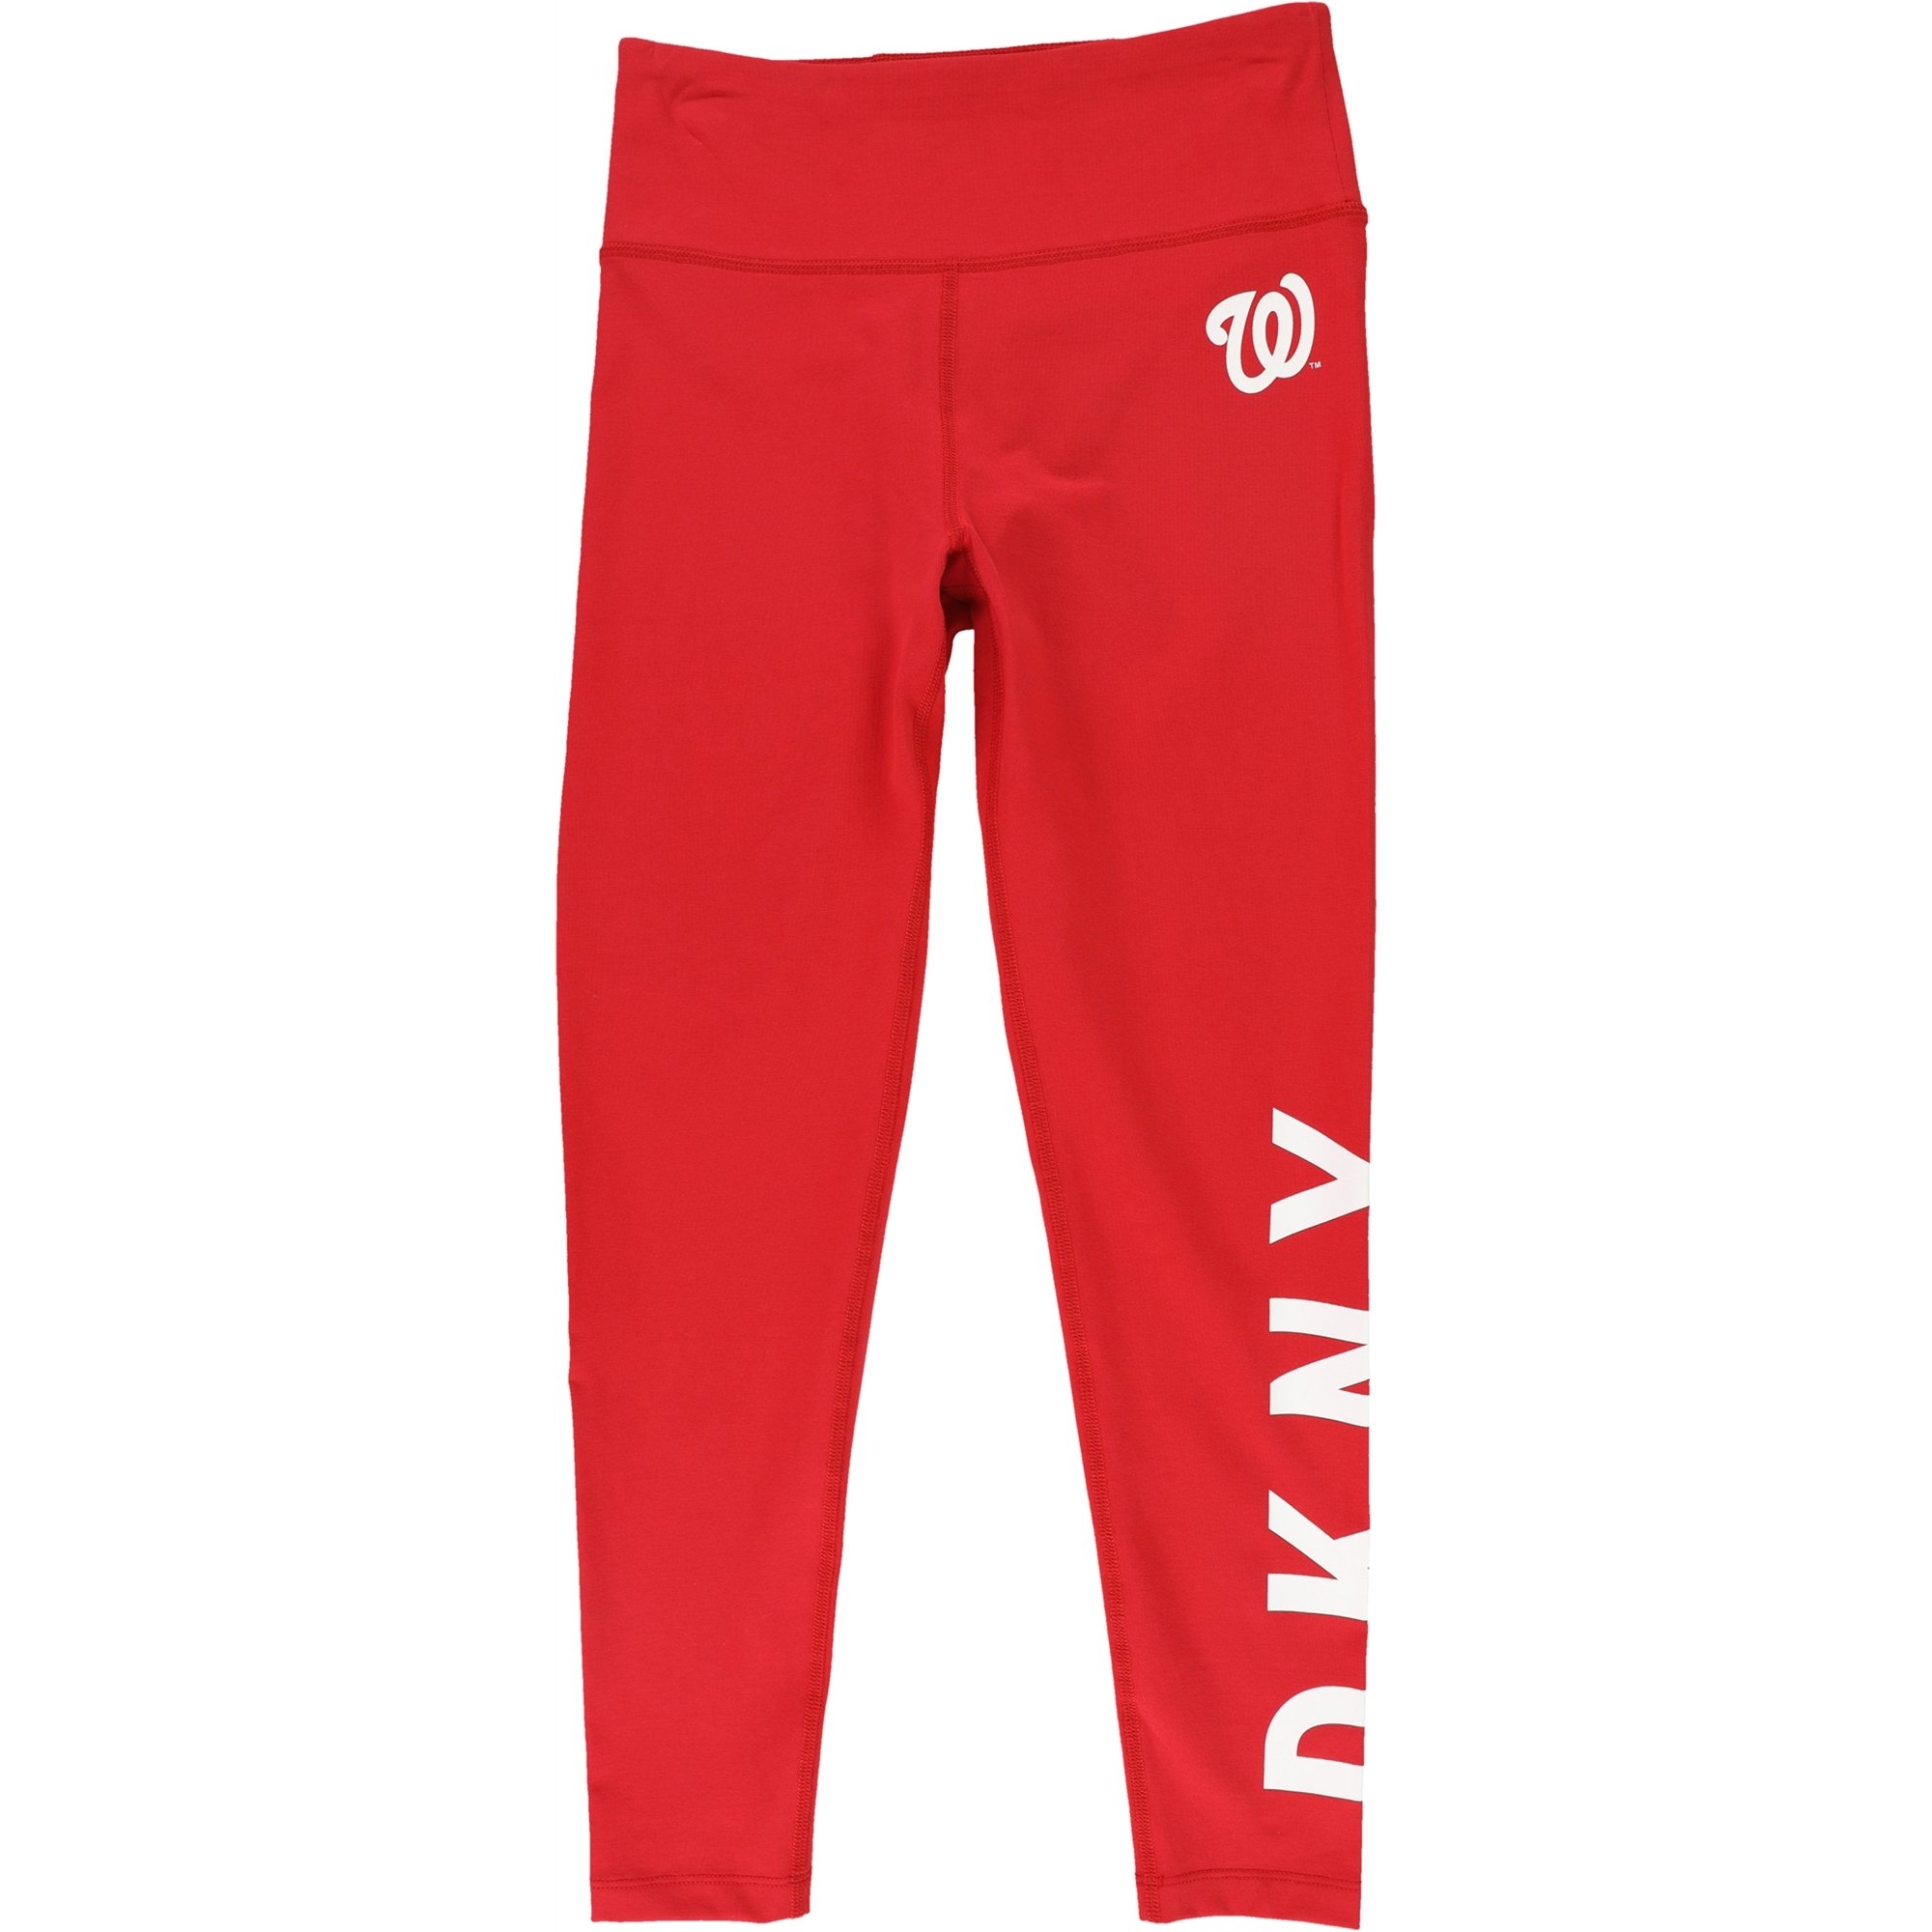 Buy a Womens DKNY New York Yankees Compression Athletic Pants Online